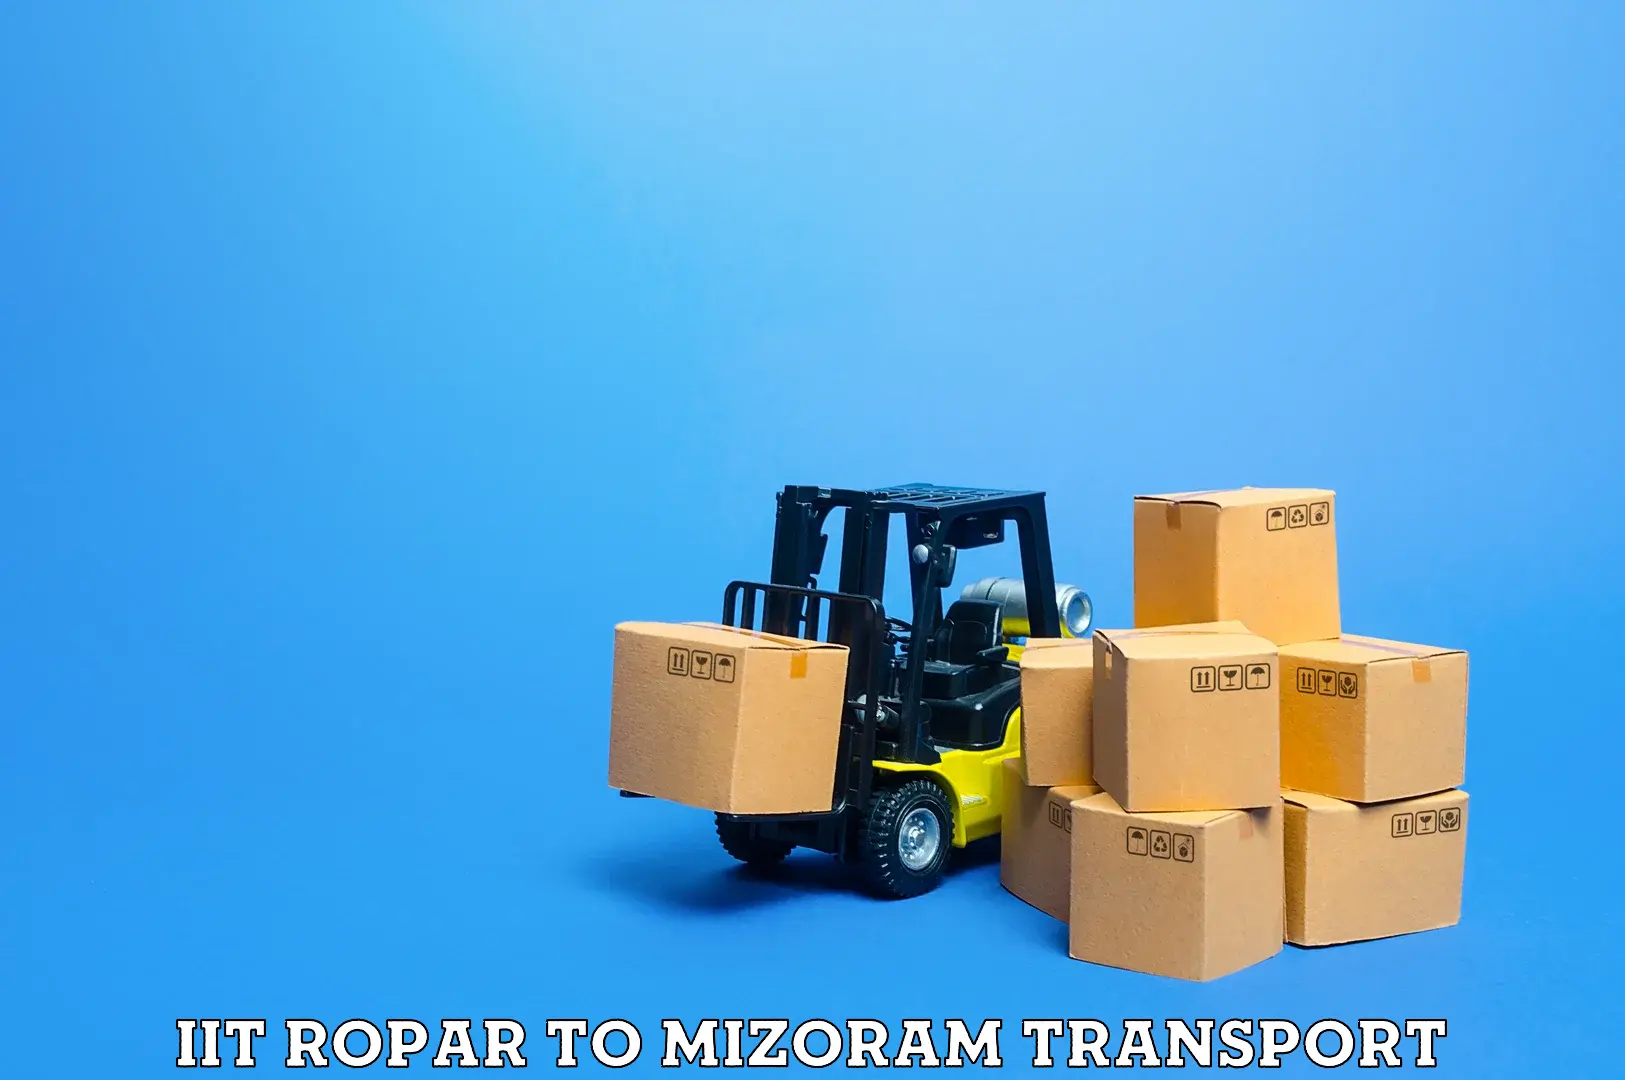 Container transport service IIT Ropar to Siaha